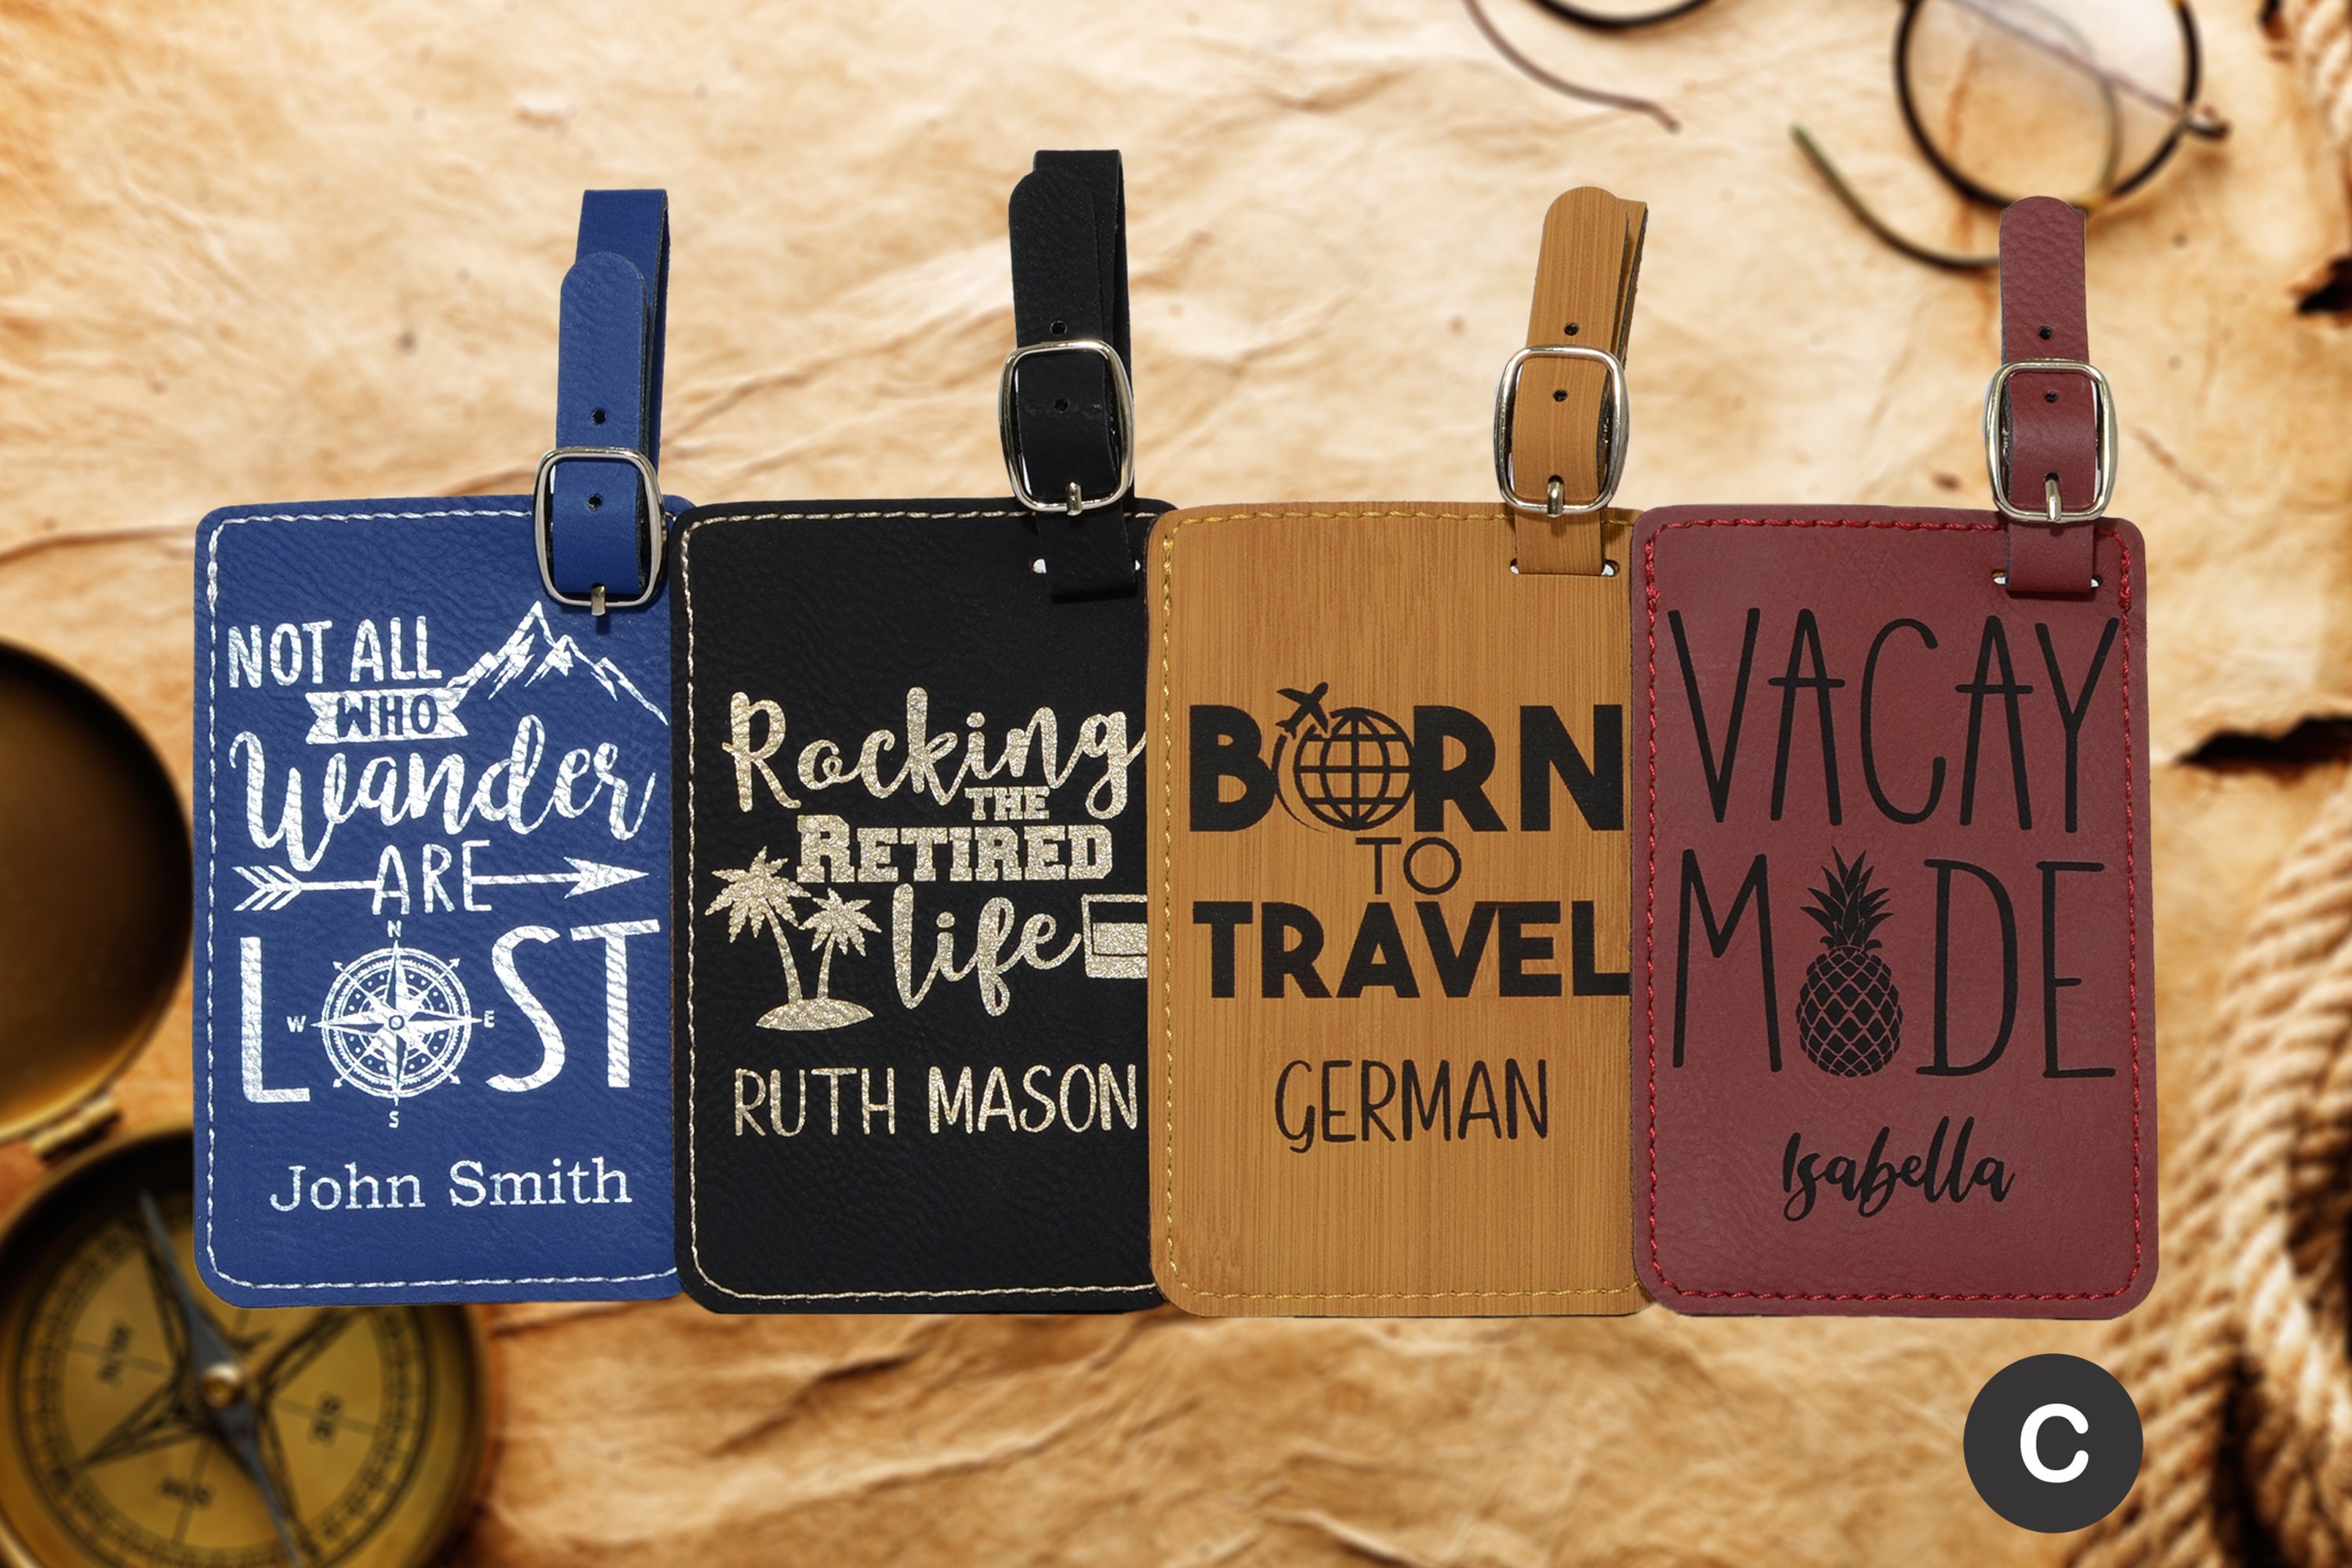 Personalized Engraved Leather Luggage Tag (11 designs)